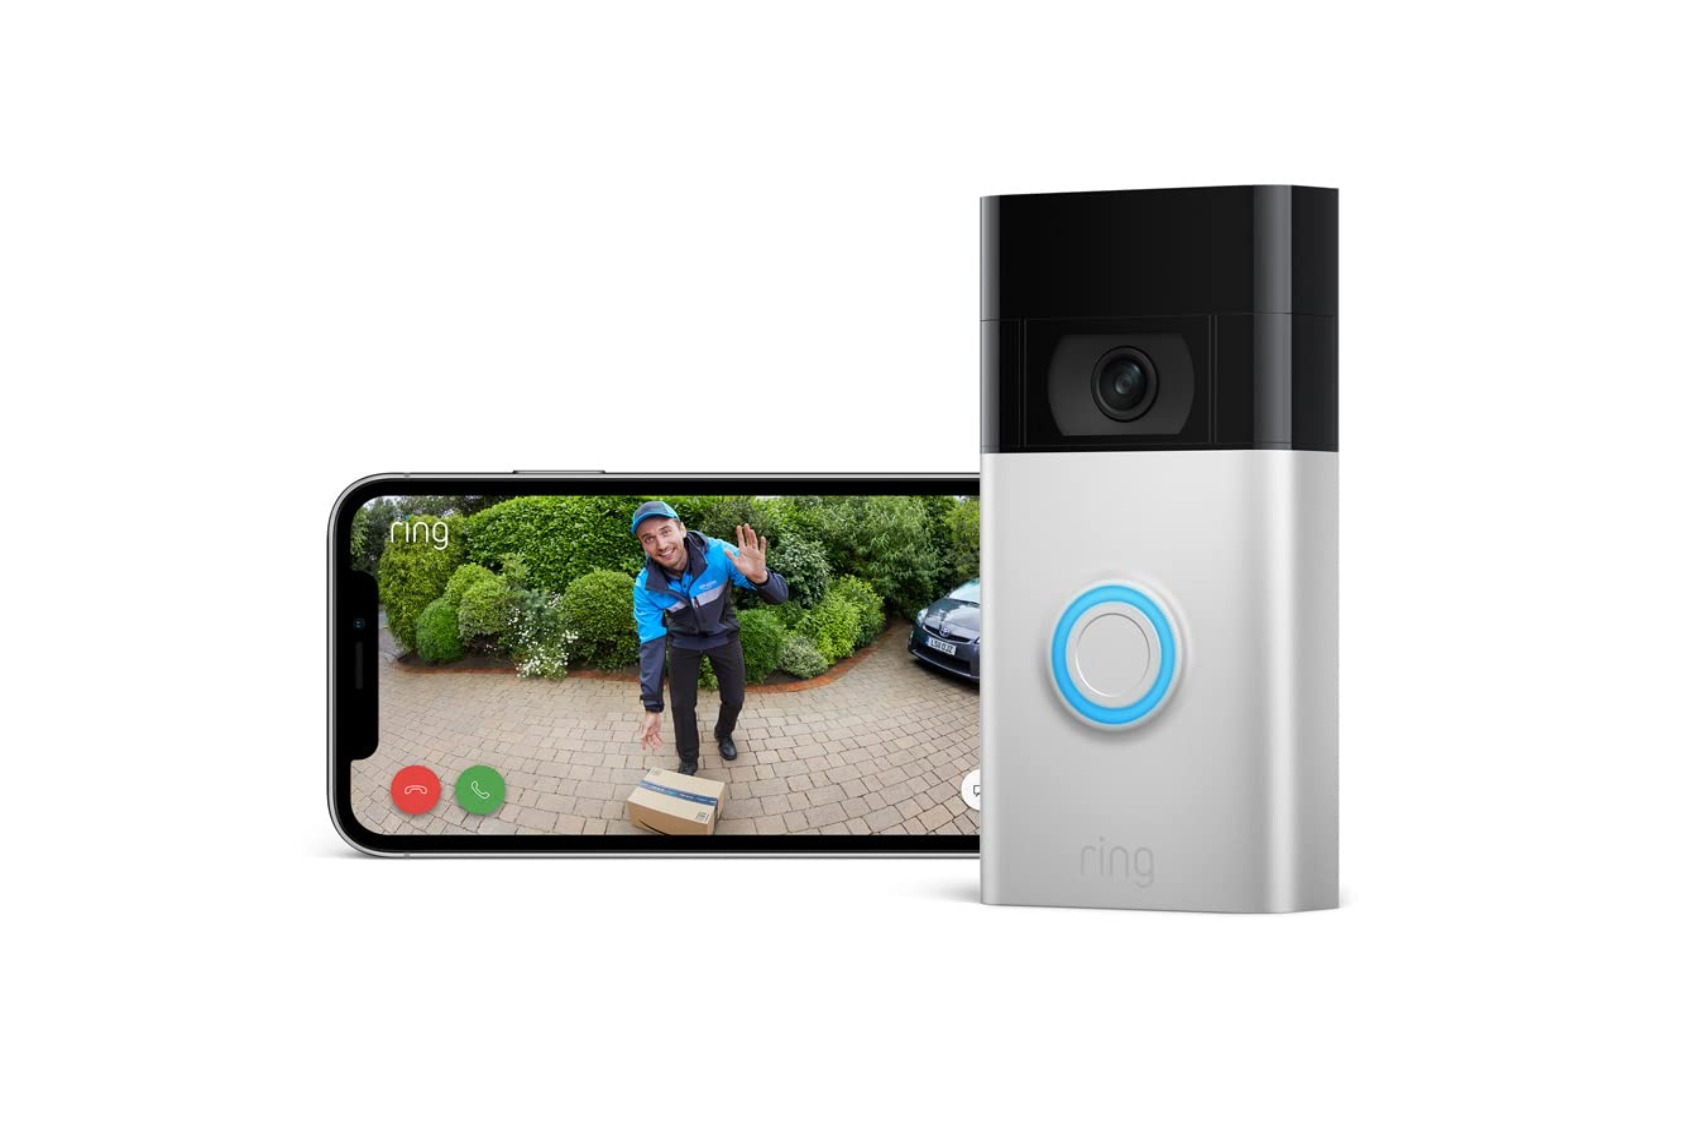 Amazon shoppers rush to buy ‘must-have’ £100 video doorbell scanning at till for £70